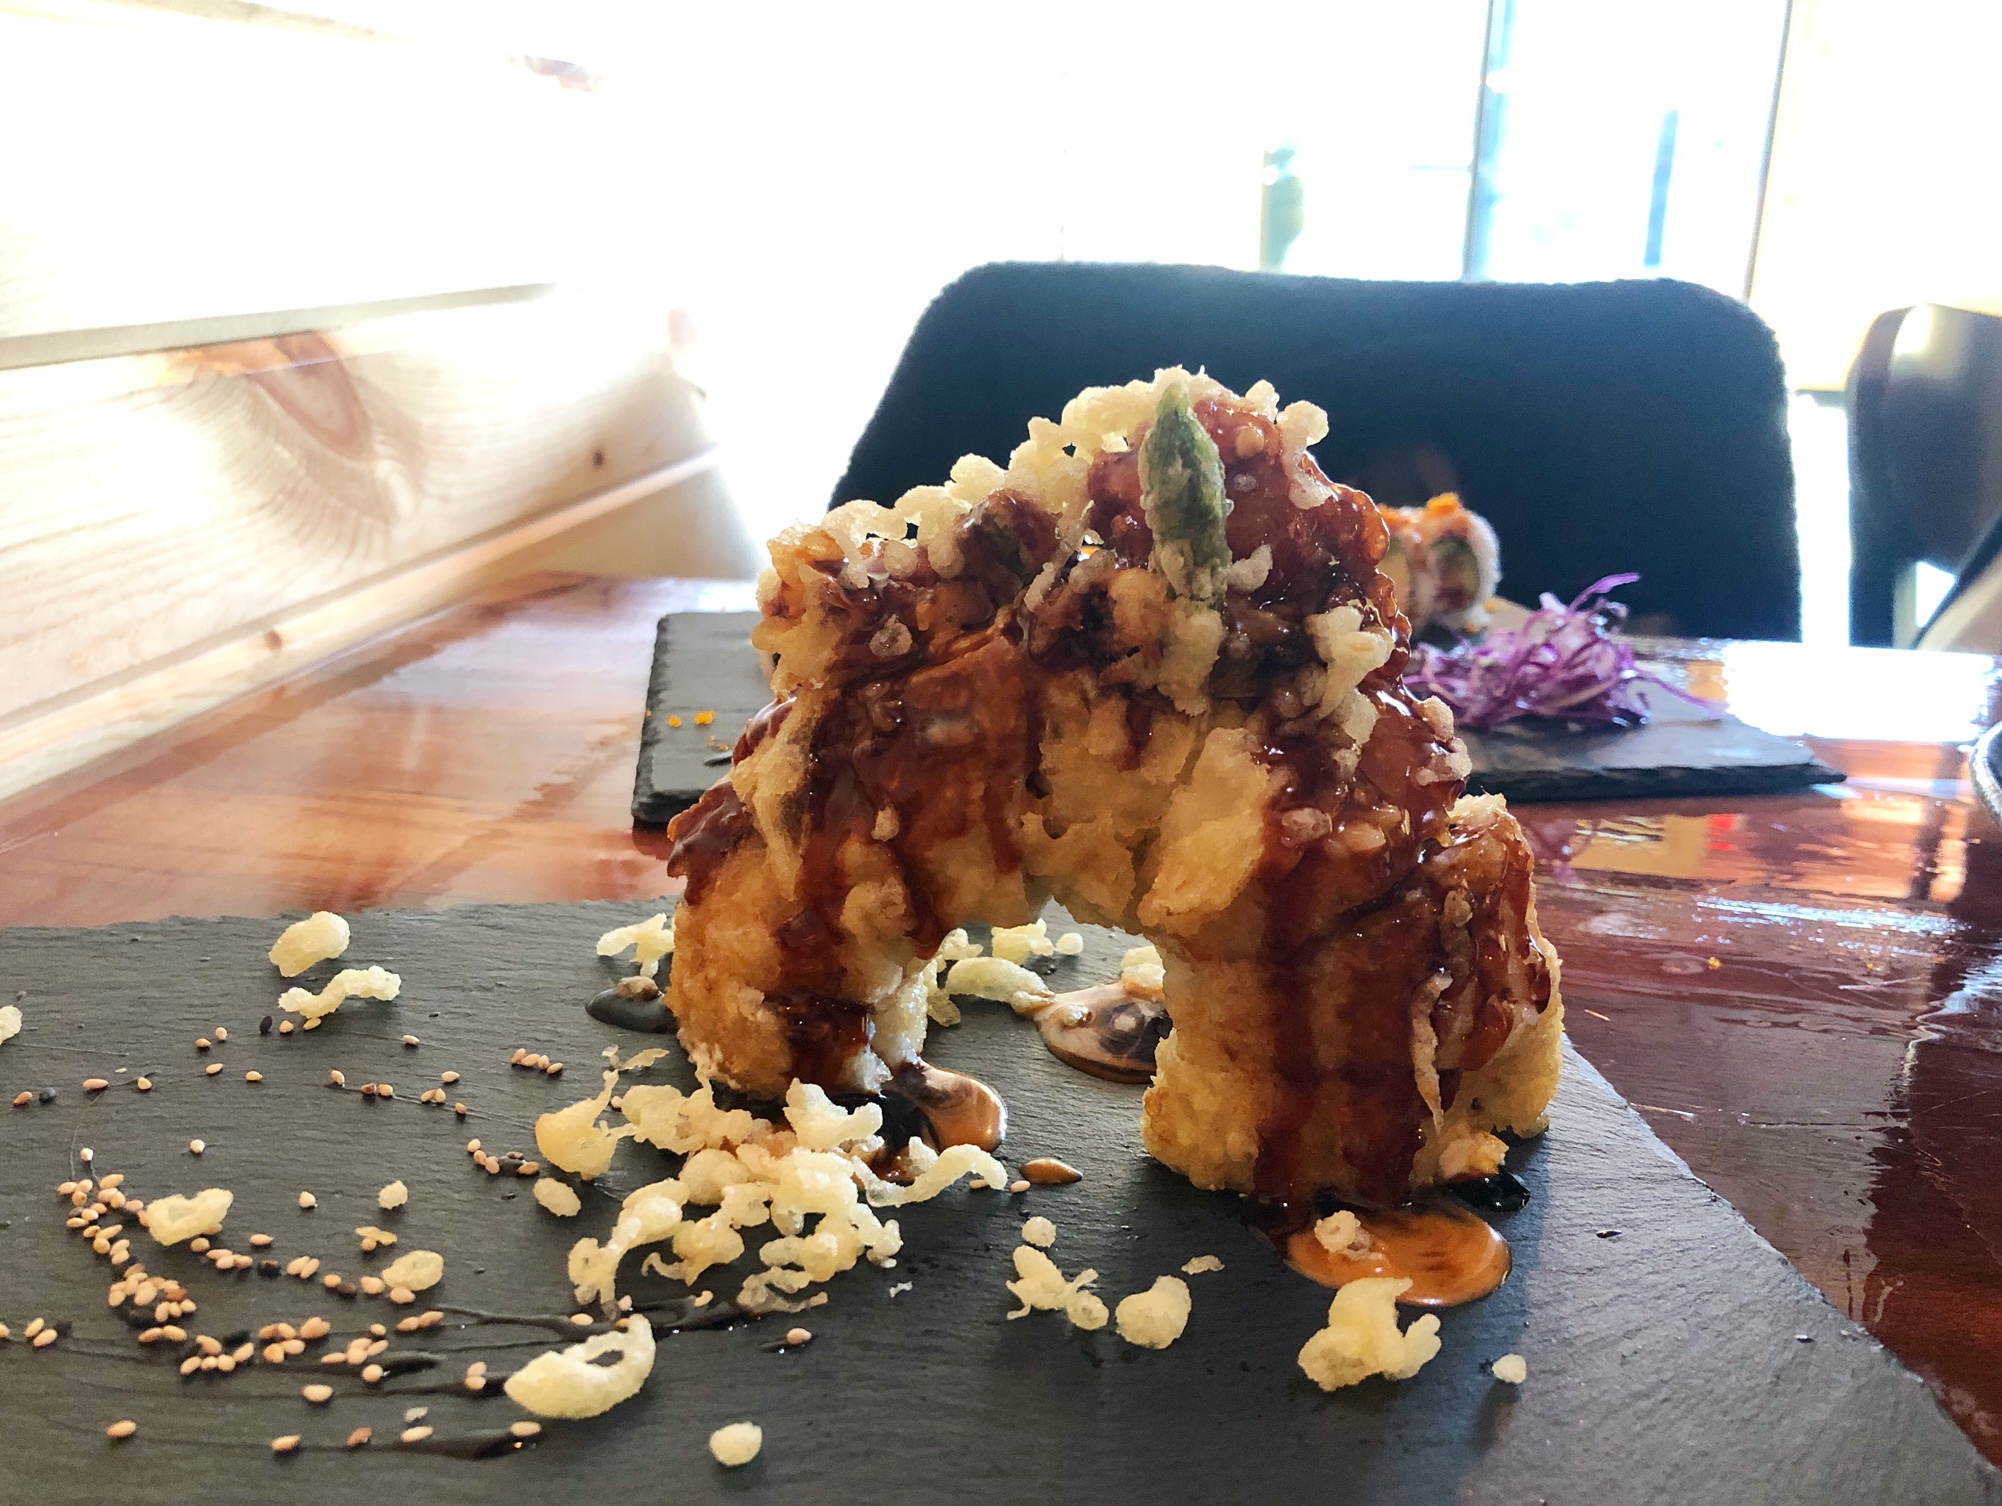 On a black stone tray, there is a sushi roll that has been fried and covered in tempura crunchies with eel sauce. Photo by Alyssa Buckley.